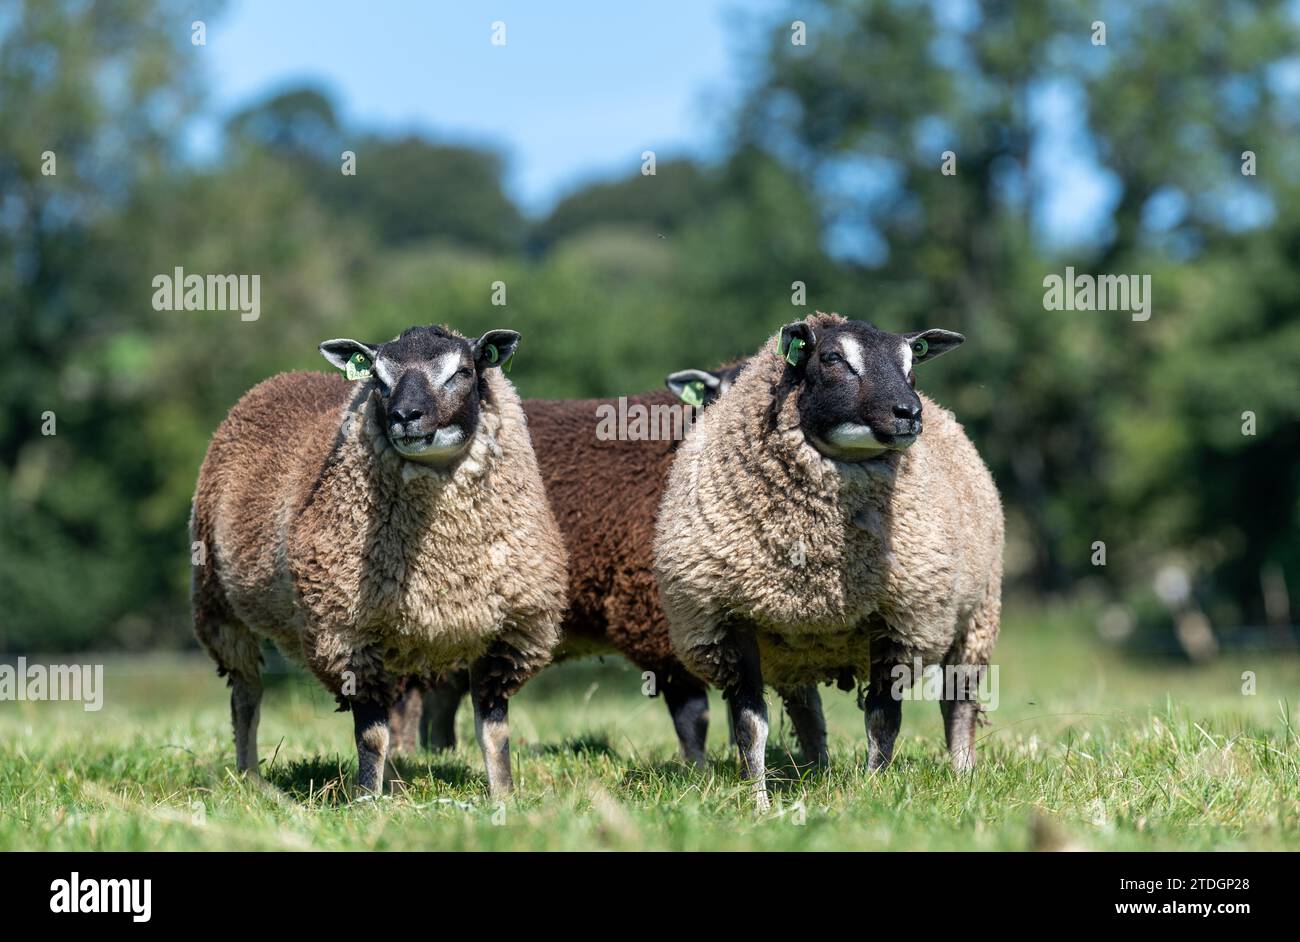 Badger Faced Texel sheep, a Dutch breed imported into the UK. Stock Photo